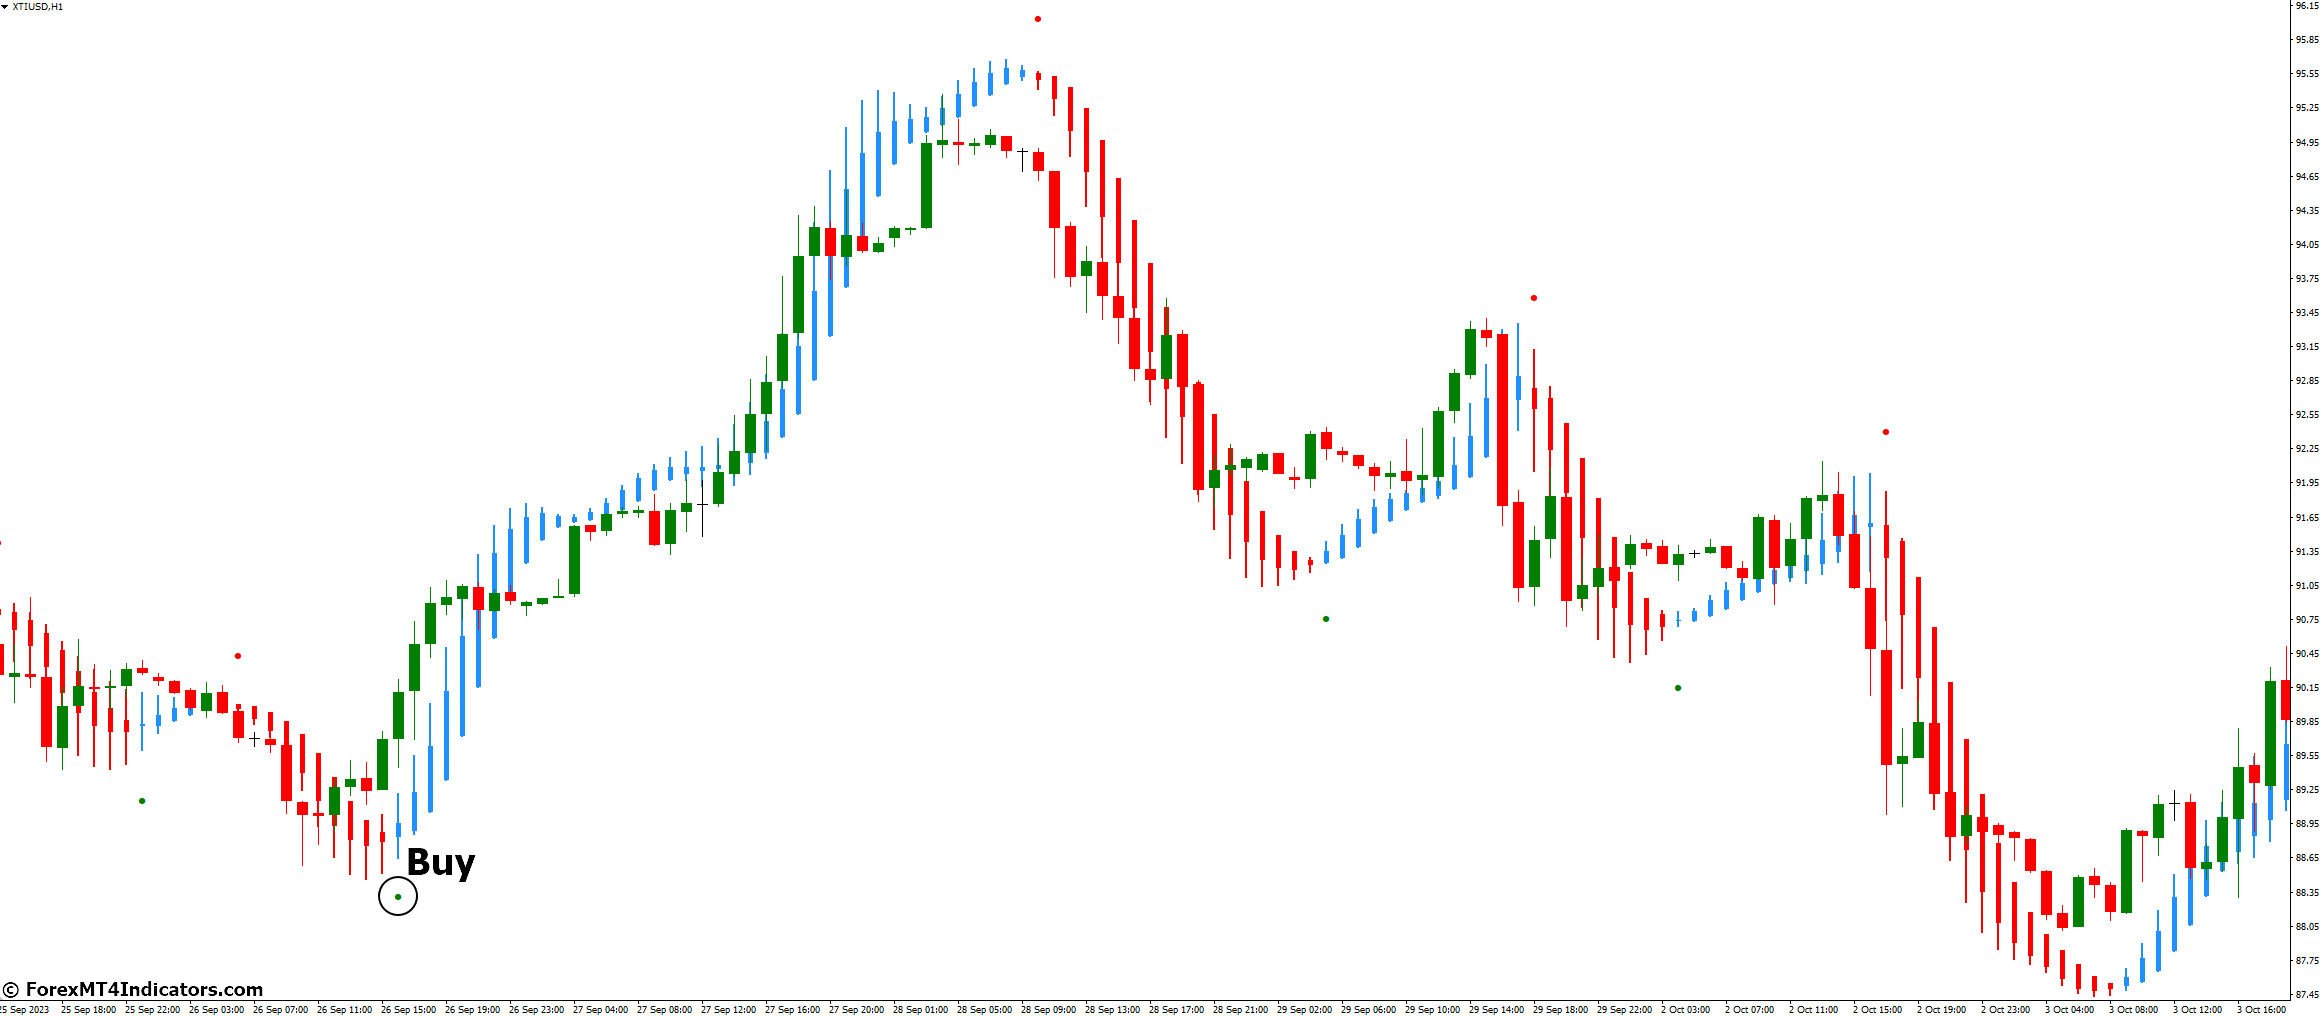 How to Trade with Heiken Ashi MA T3 New Indicator - Buy Entry